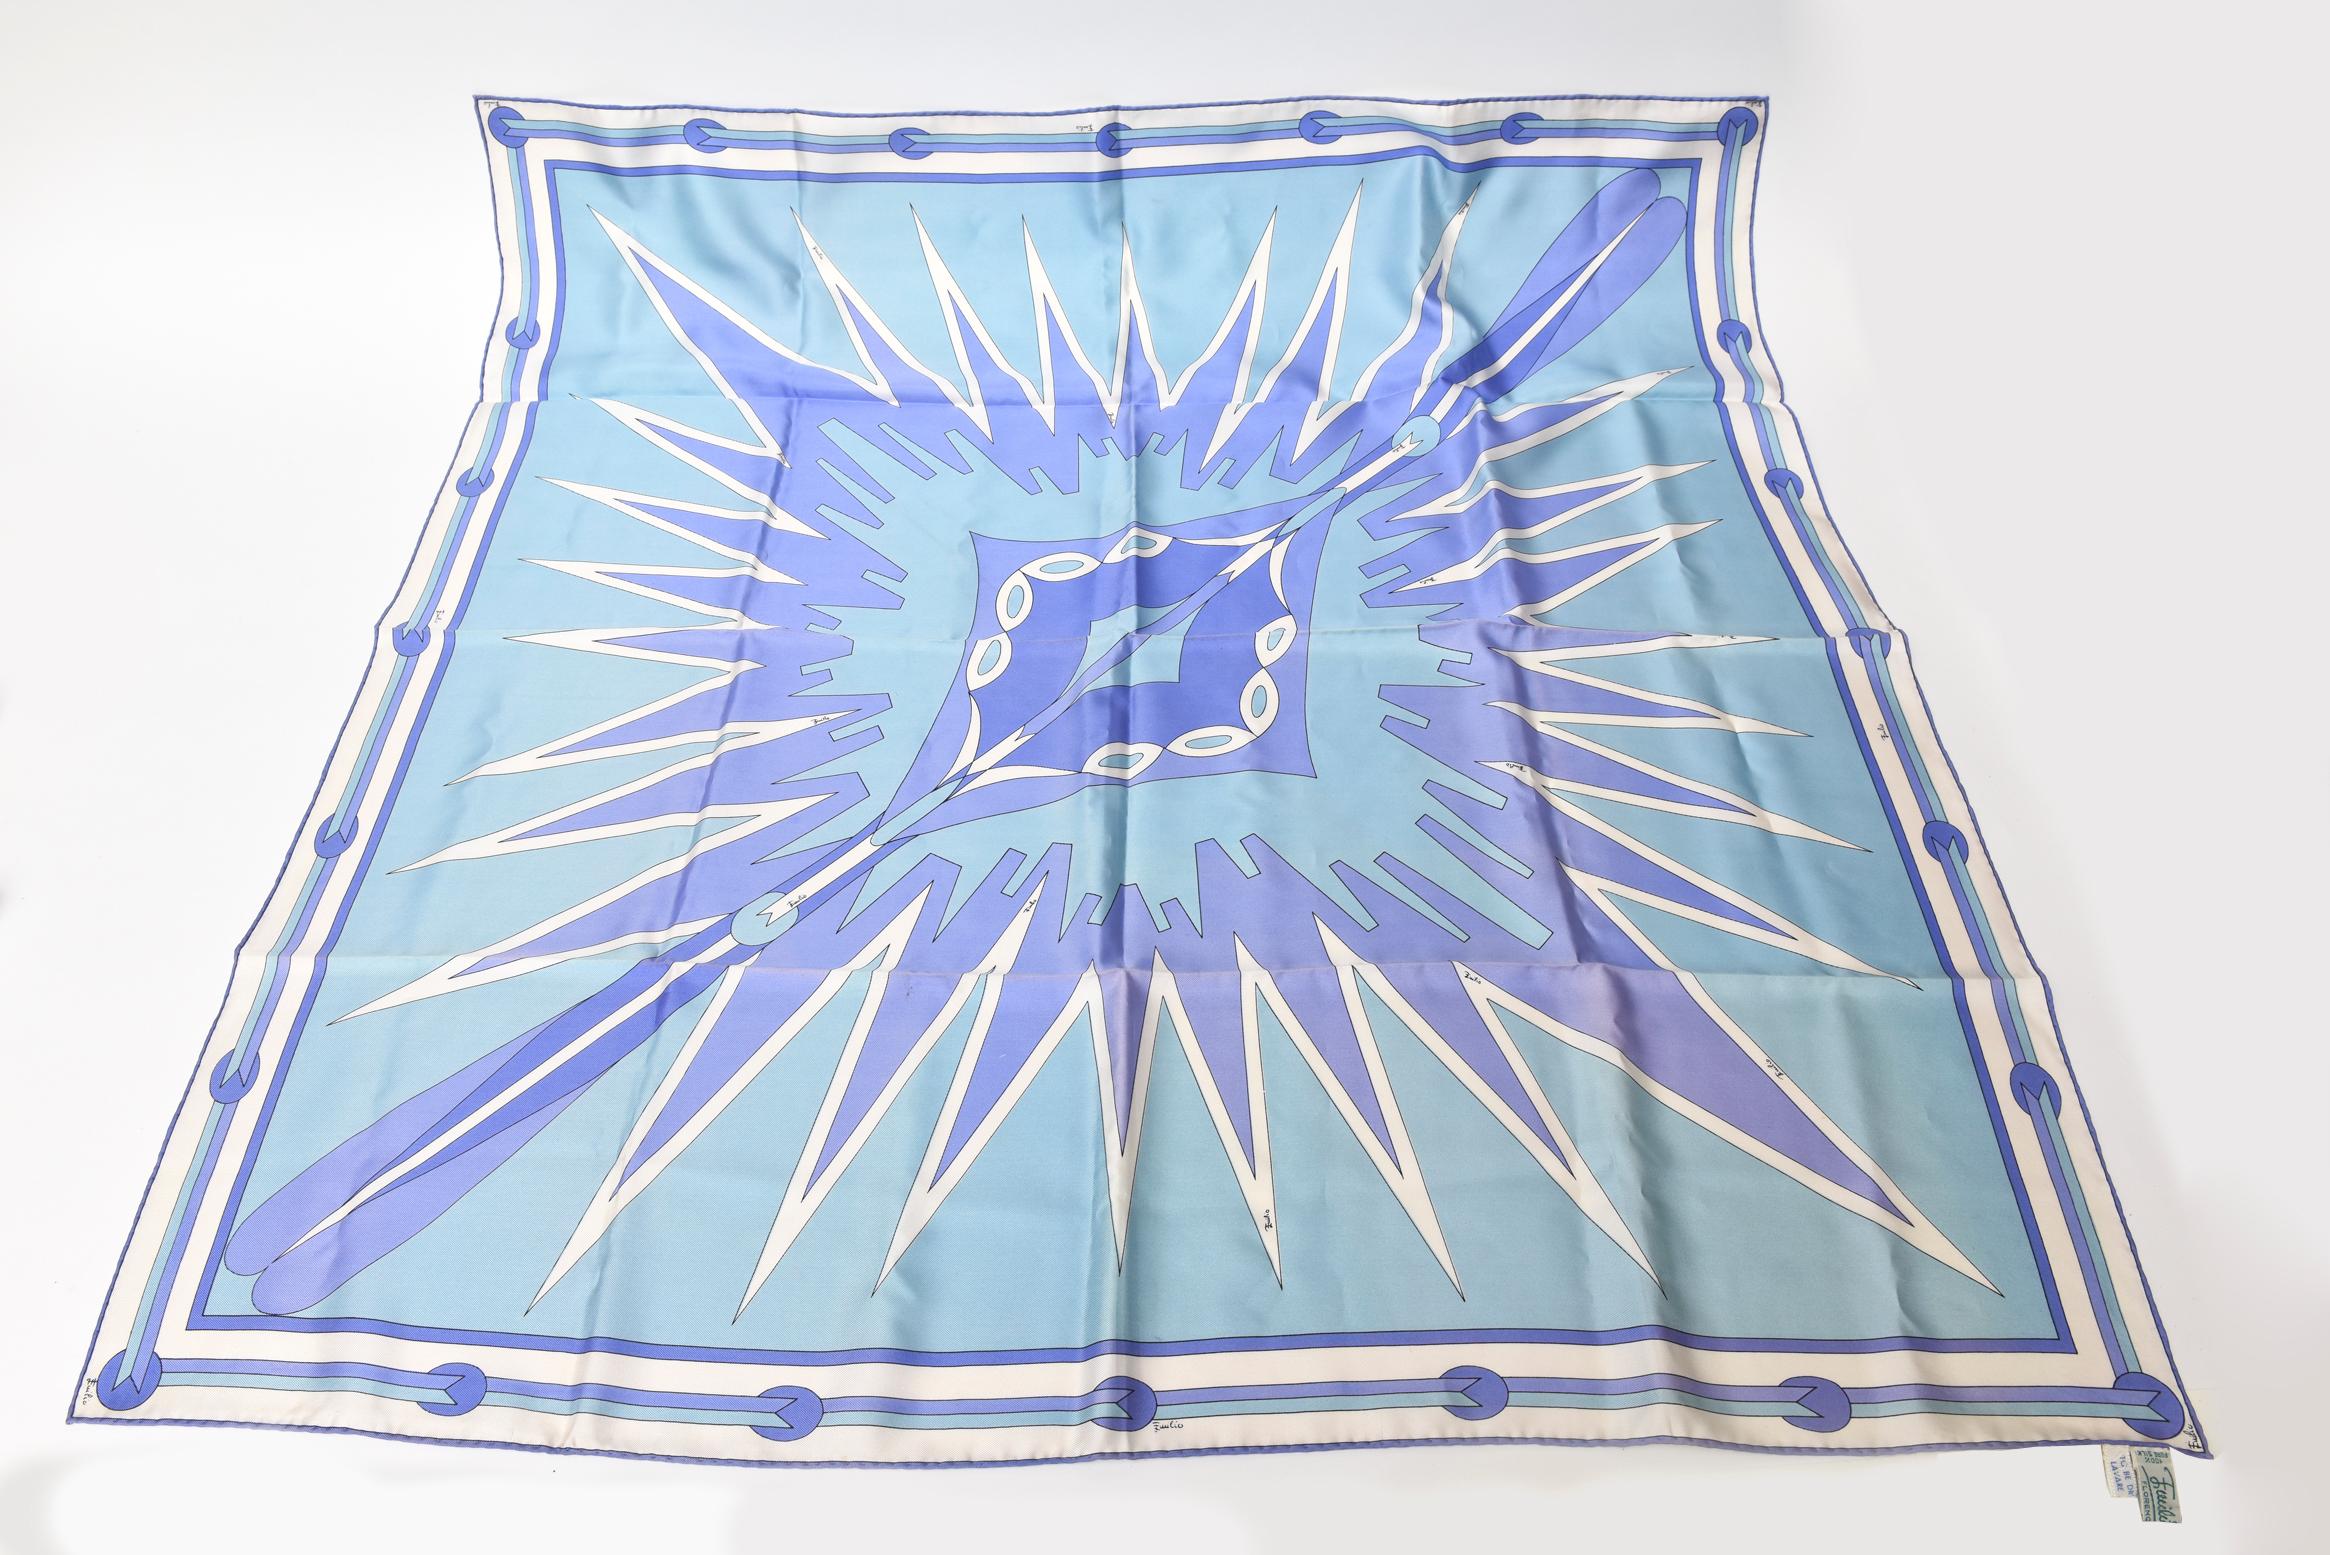 This gorgeous vintage Italian silk Emilio Pucci geometric square scarf has beautiful colors and patterns. This is an old tag from the late 60's or early 70's. The array of blue and purple tones is so happy and peaceful yet vibrant. It is 100% pure